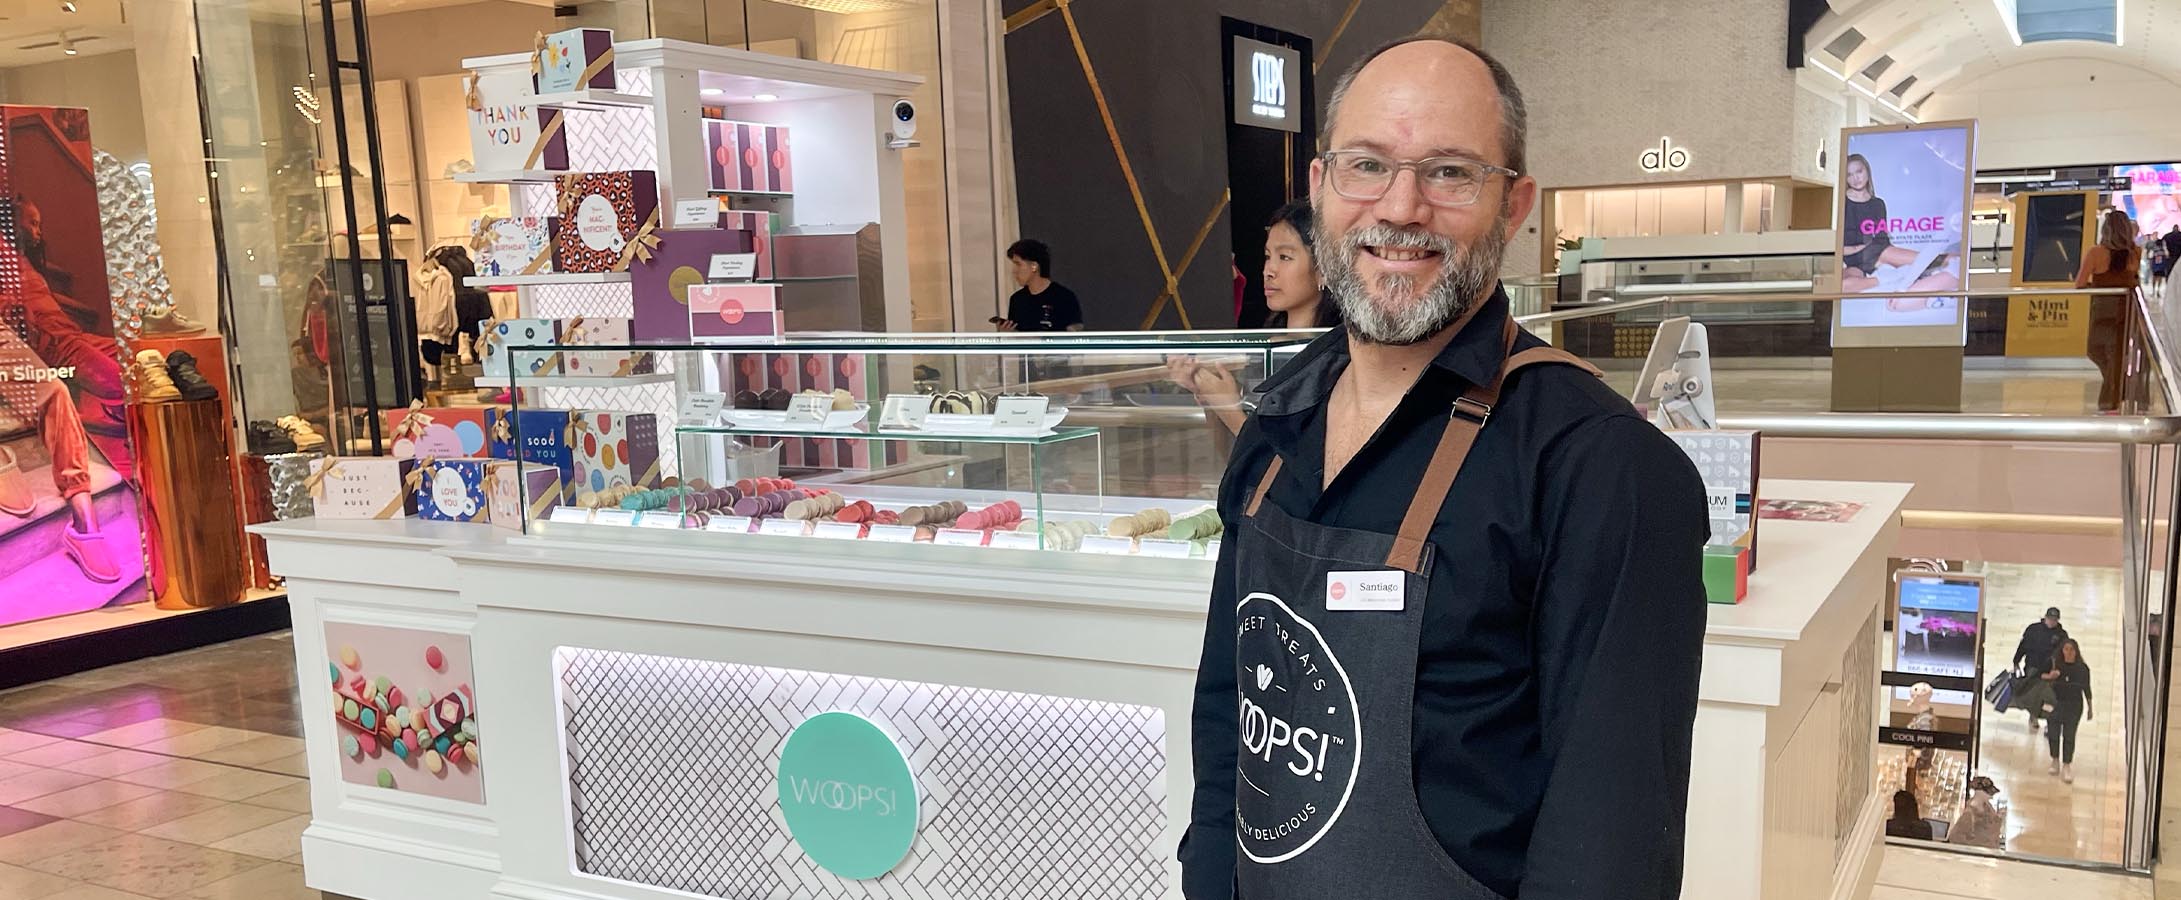 A smiling man with a Woops! Apron stands in front of Woops! Macarons & Gifts macaron kiosk.